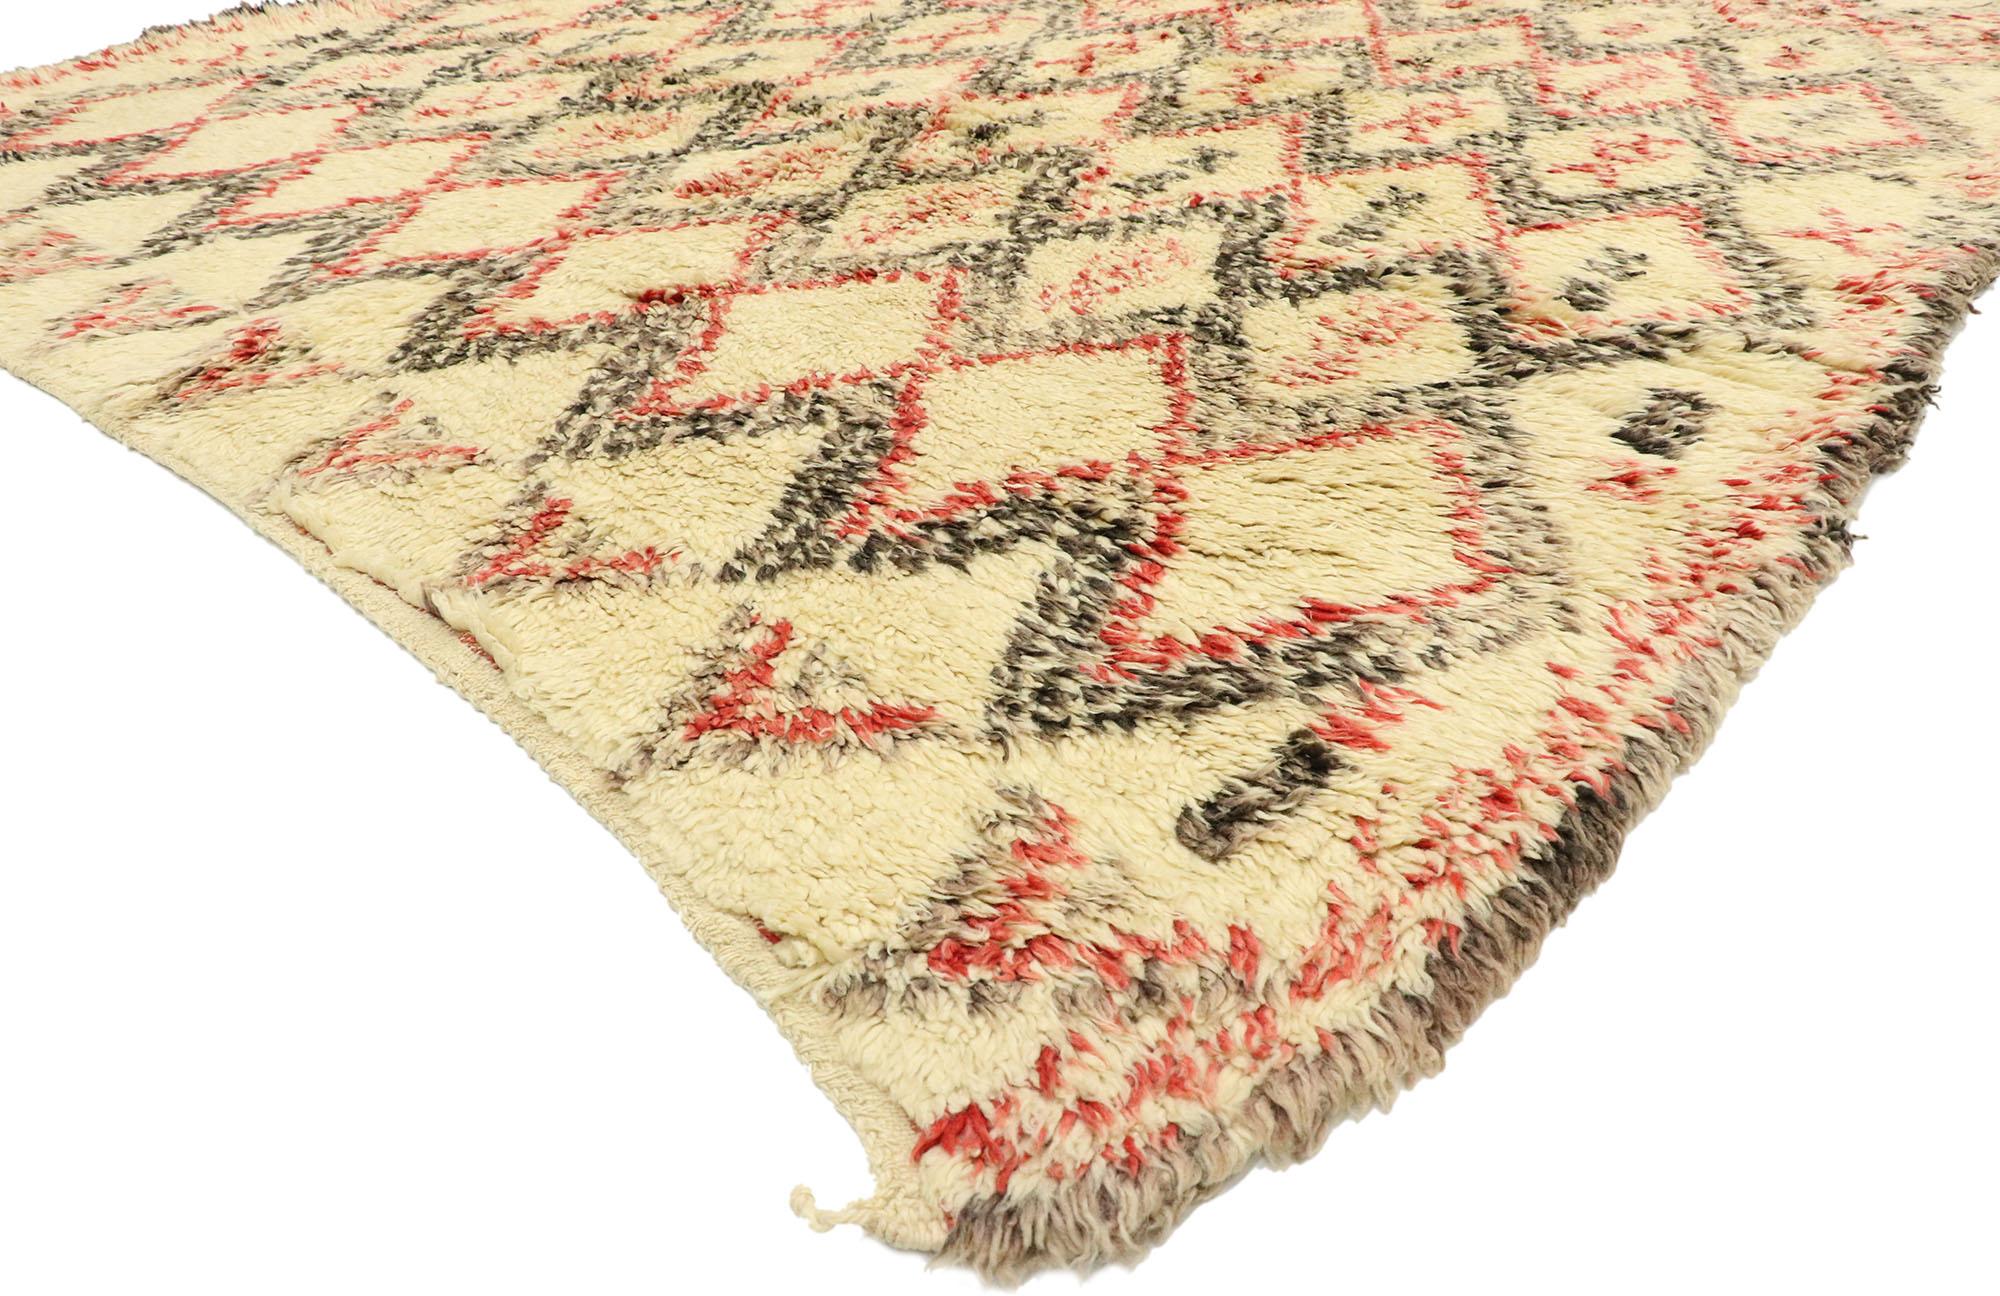 74509, vintage Beni Ouarain Moroccan rug with Mid-Century Modern style. This hand knotted wool vintage Beni Ourain Moroccan rug features an all-over diamond trellis pattern spread across a sandy-beige background. Charcoal and red colored chevron